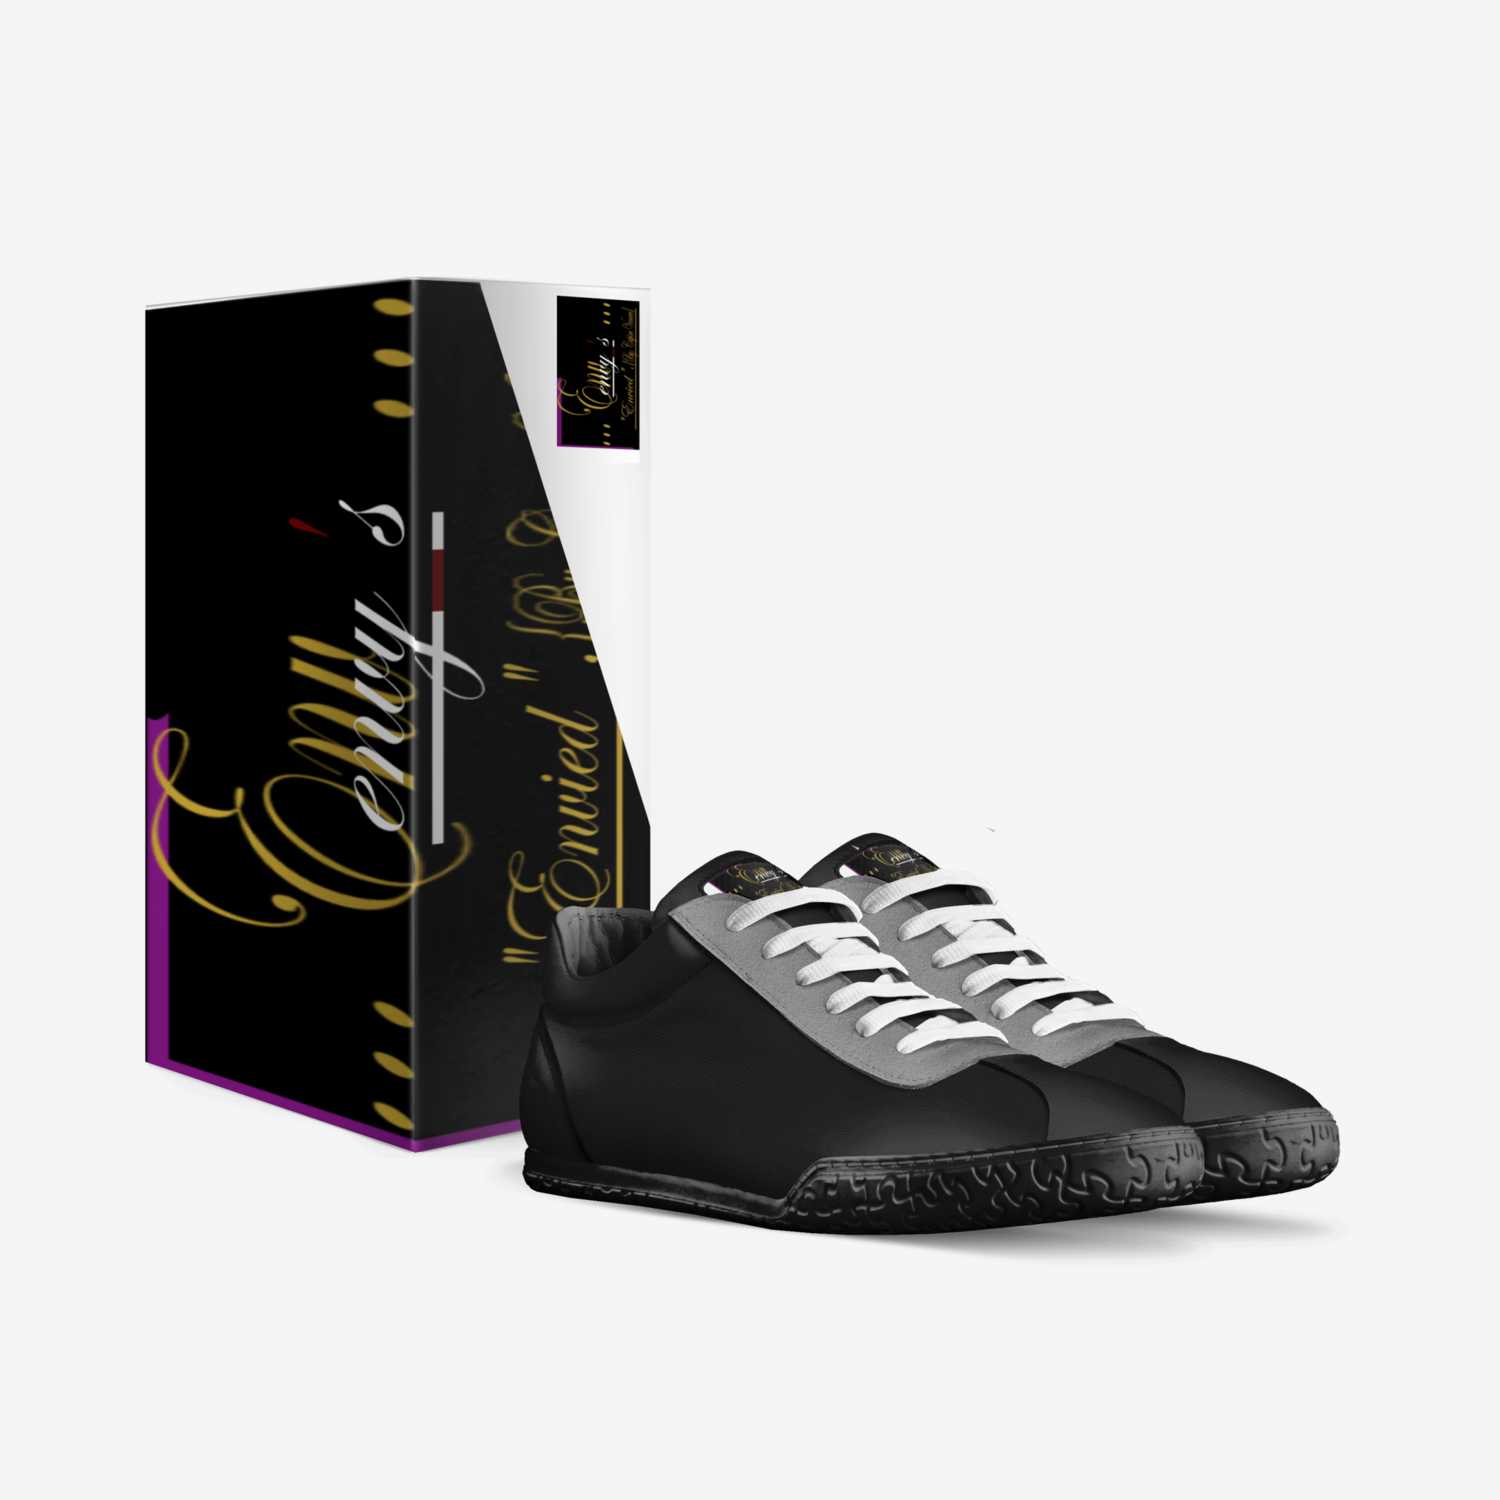 Envy's custom made in Italy shoes by Sidney De'Jon | Box view